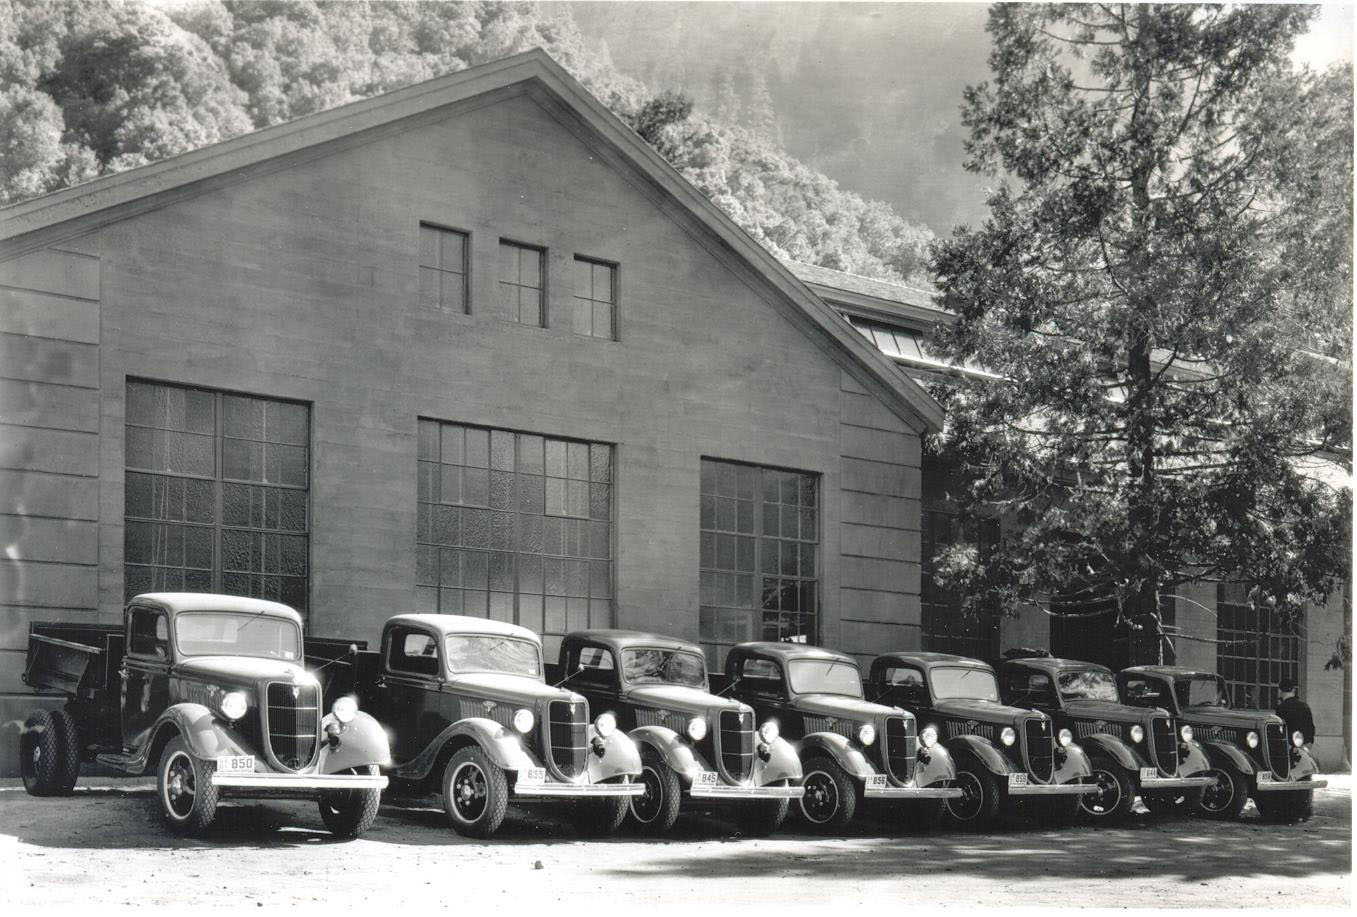 I believe these are brand new 1936 Ford Model 51 trucks parked in front of the Yosemite Machine Shop (National Park Service) in the Yosemite Valley. Appears to be Department of the Interior license plates. This side of building is still in use by maintenance personnel. The other side of the building, which is out of sight on the right, houses the fire station and jail. 